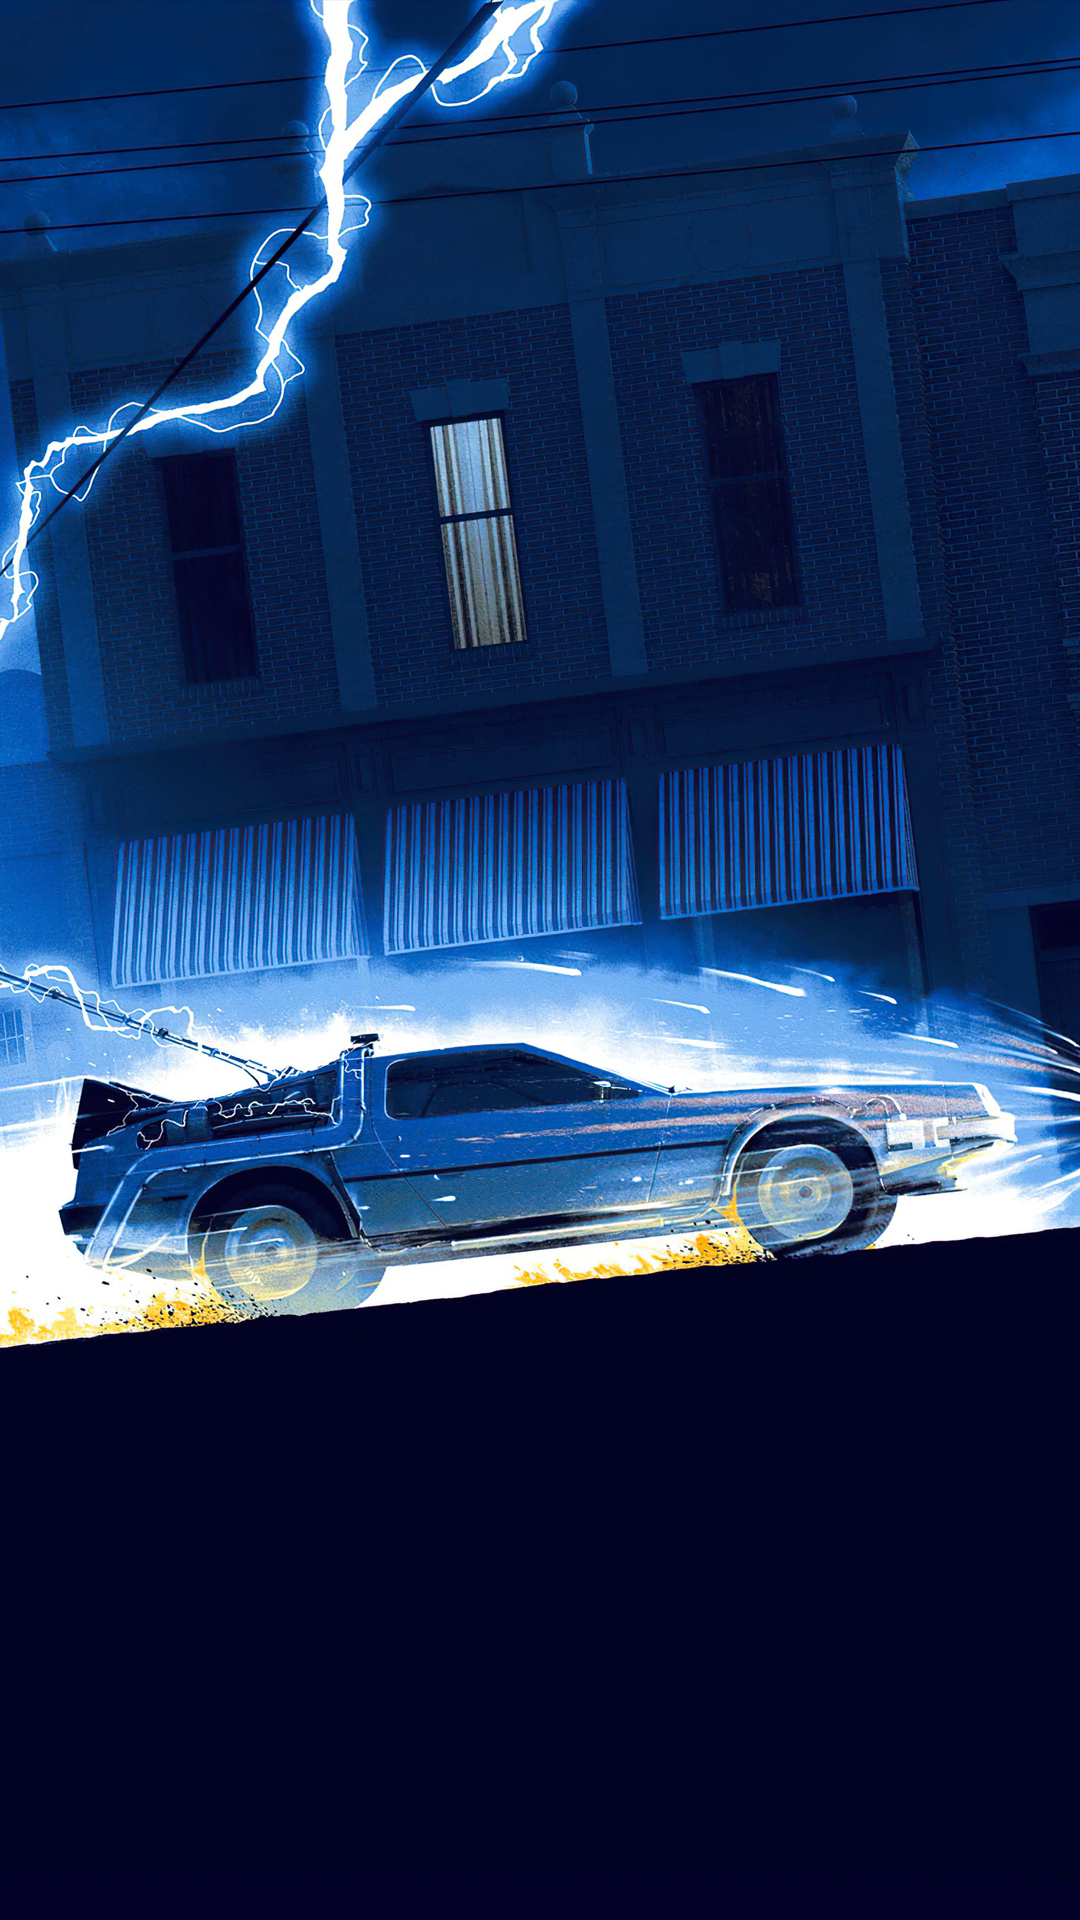 Best Back to the future iPhone HD Wallpapers  iLikeWallpaper